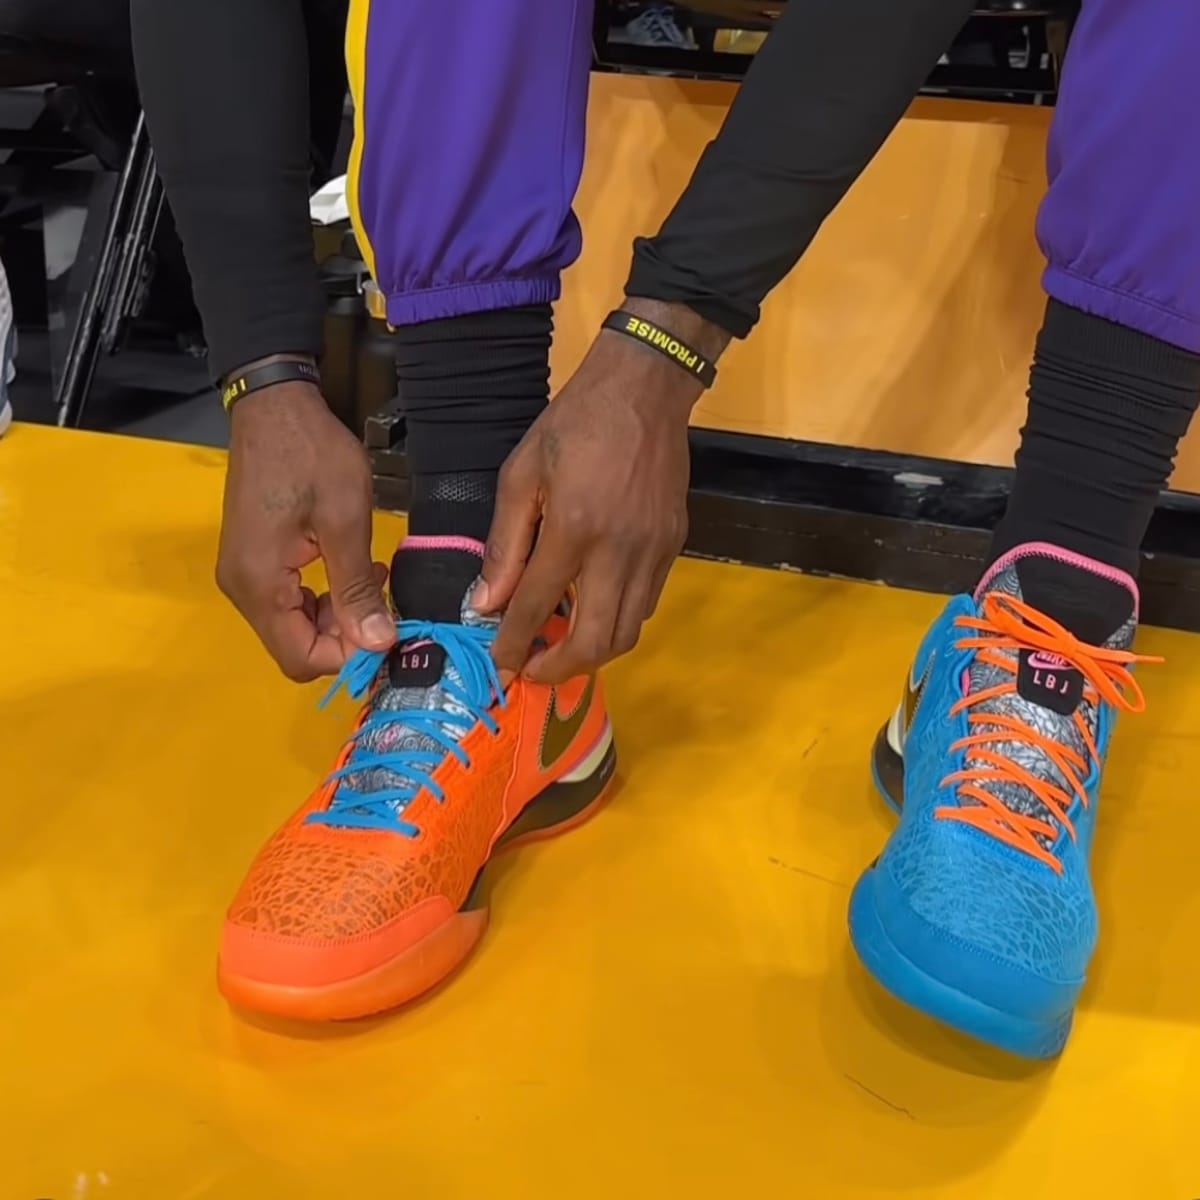 LeBron Wears Nike LeBron NXXT in Colorway - Sports Illustrated FanNation Kicks News, Analysis and